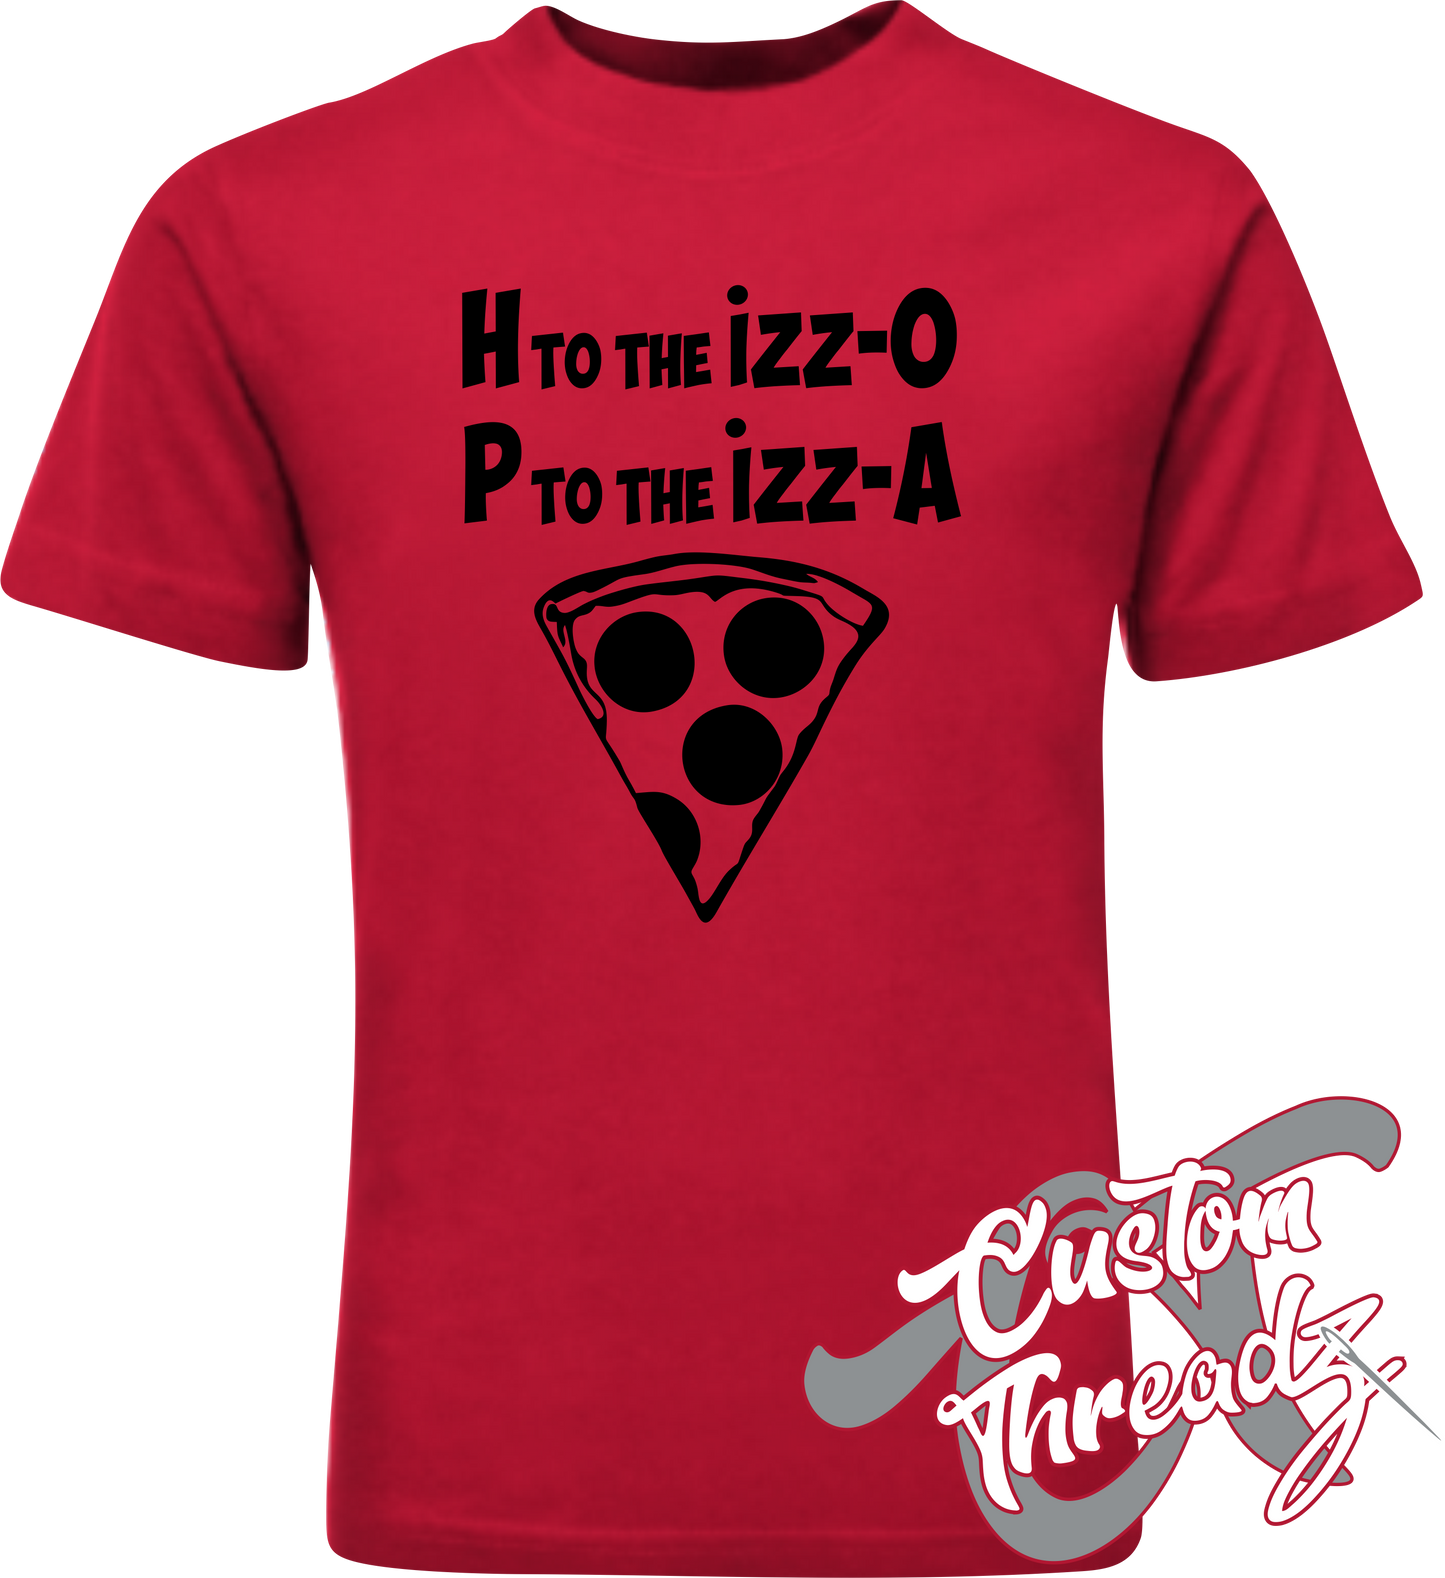 red tee with h to the izzo p to the izza pizza hova DTG printed design